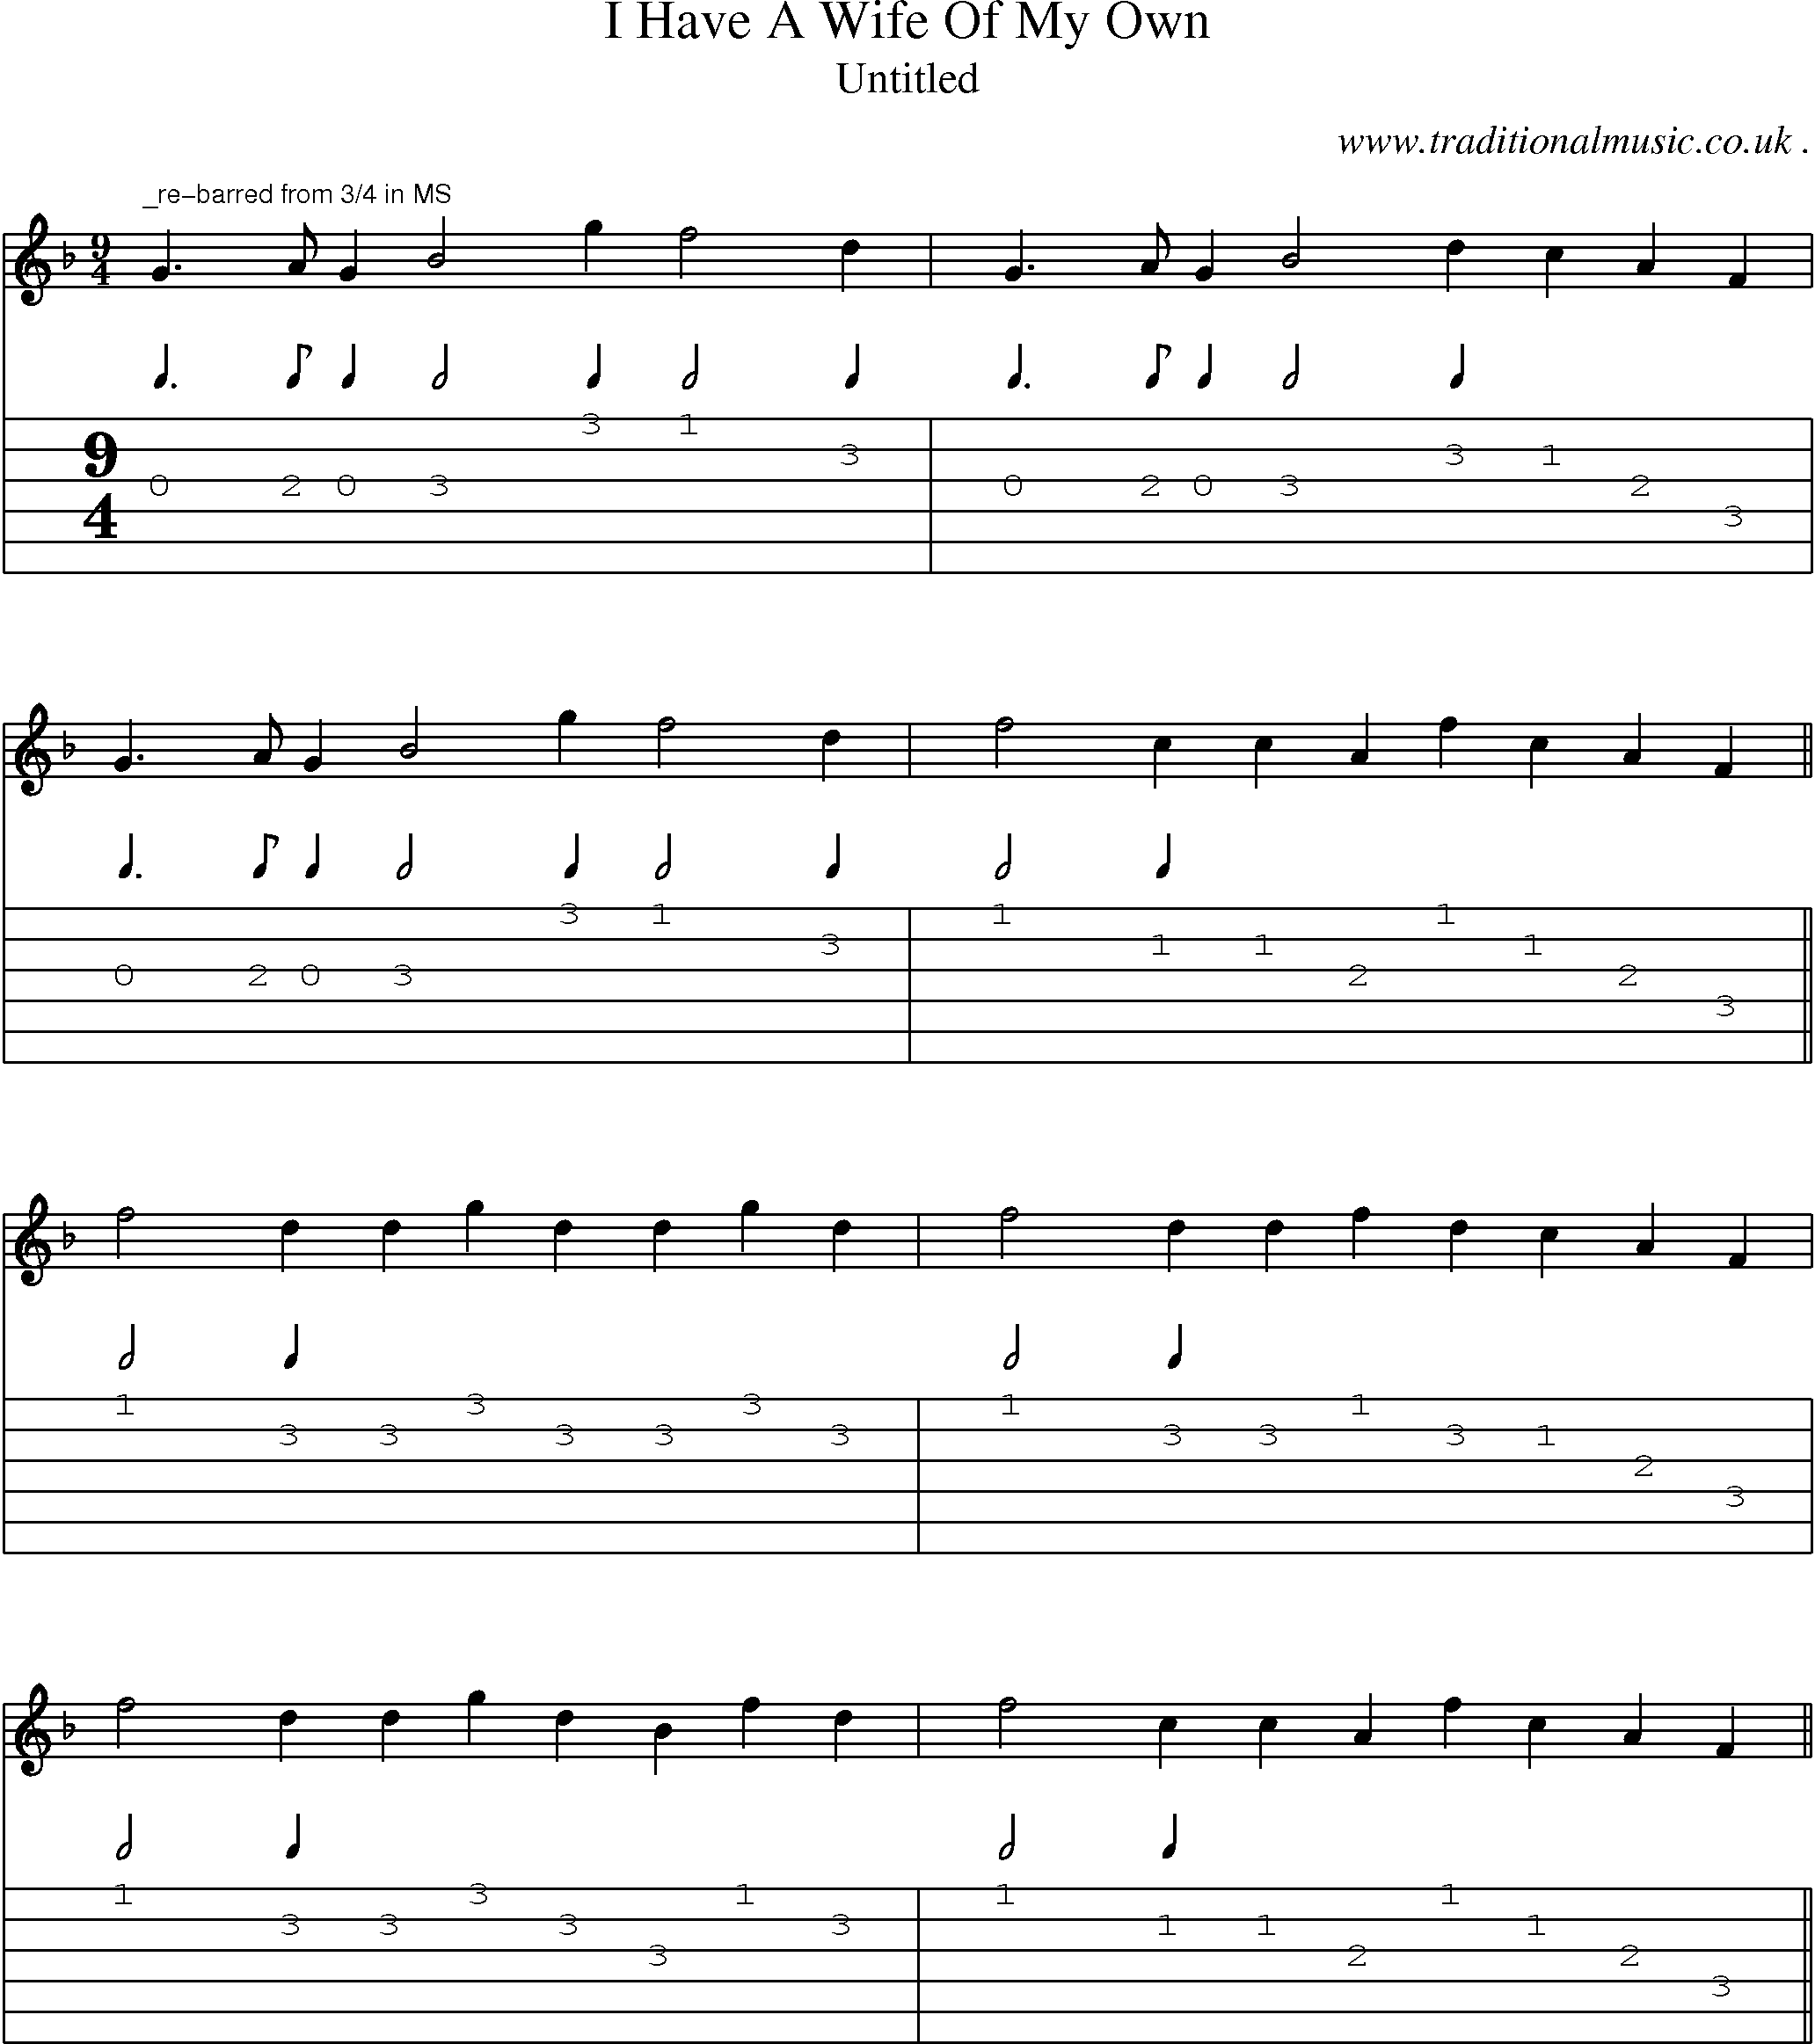 Sheet-Music and Guitar Tabs for I Have A Wife Of My Own